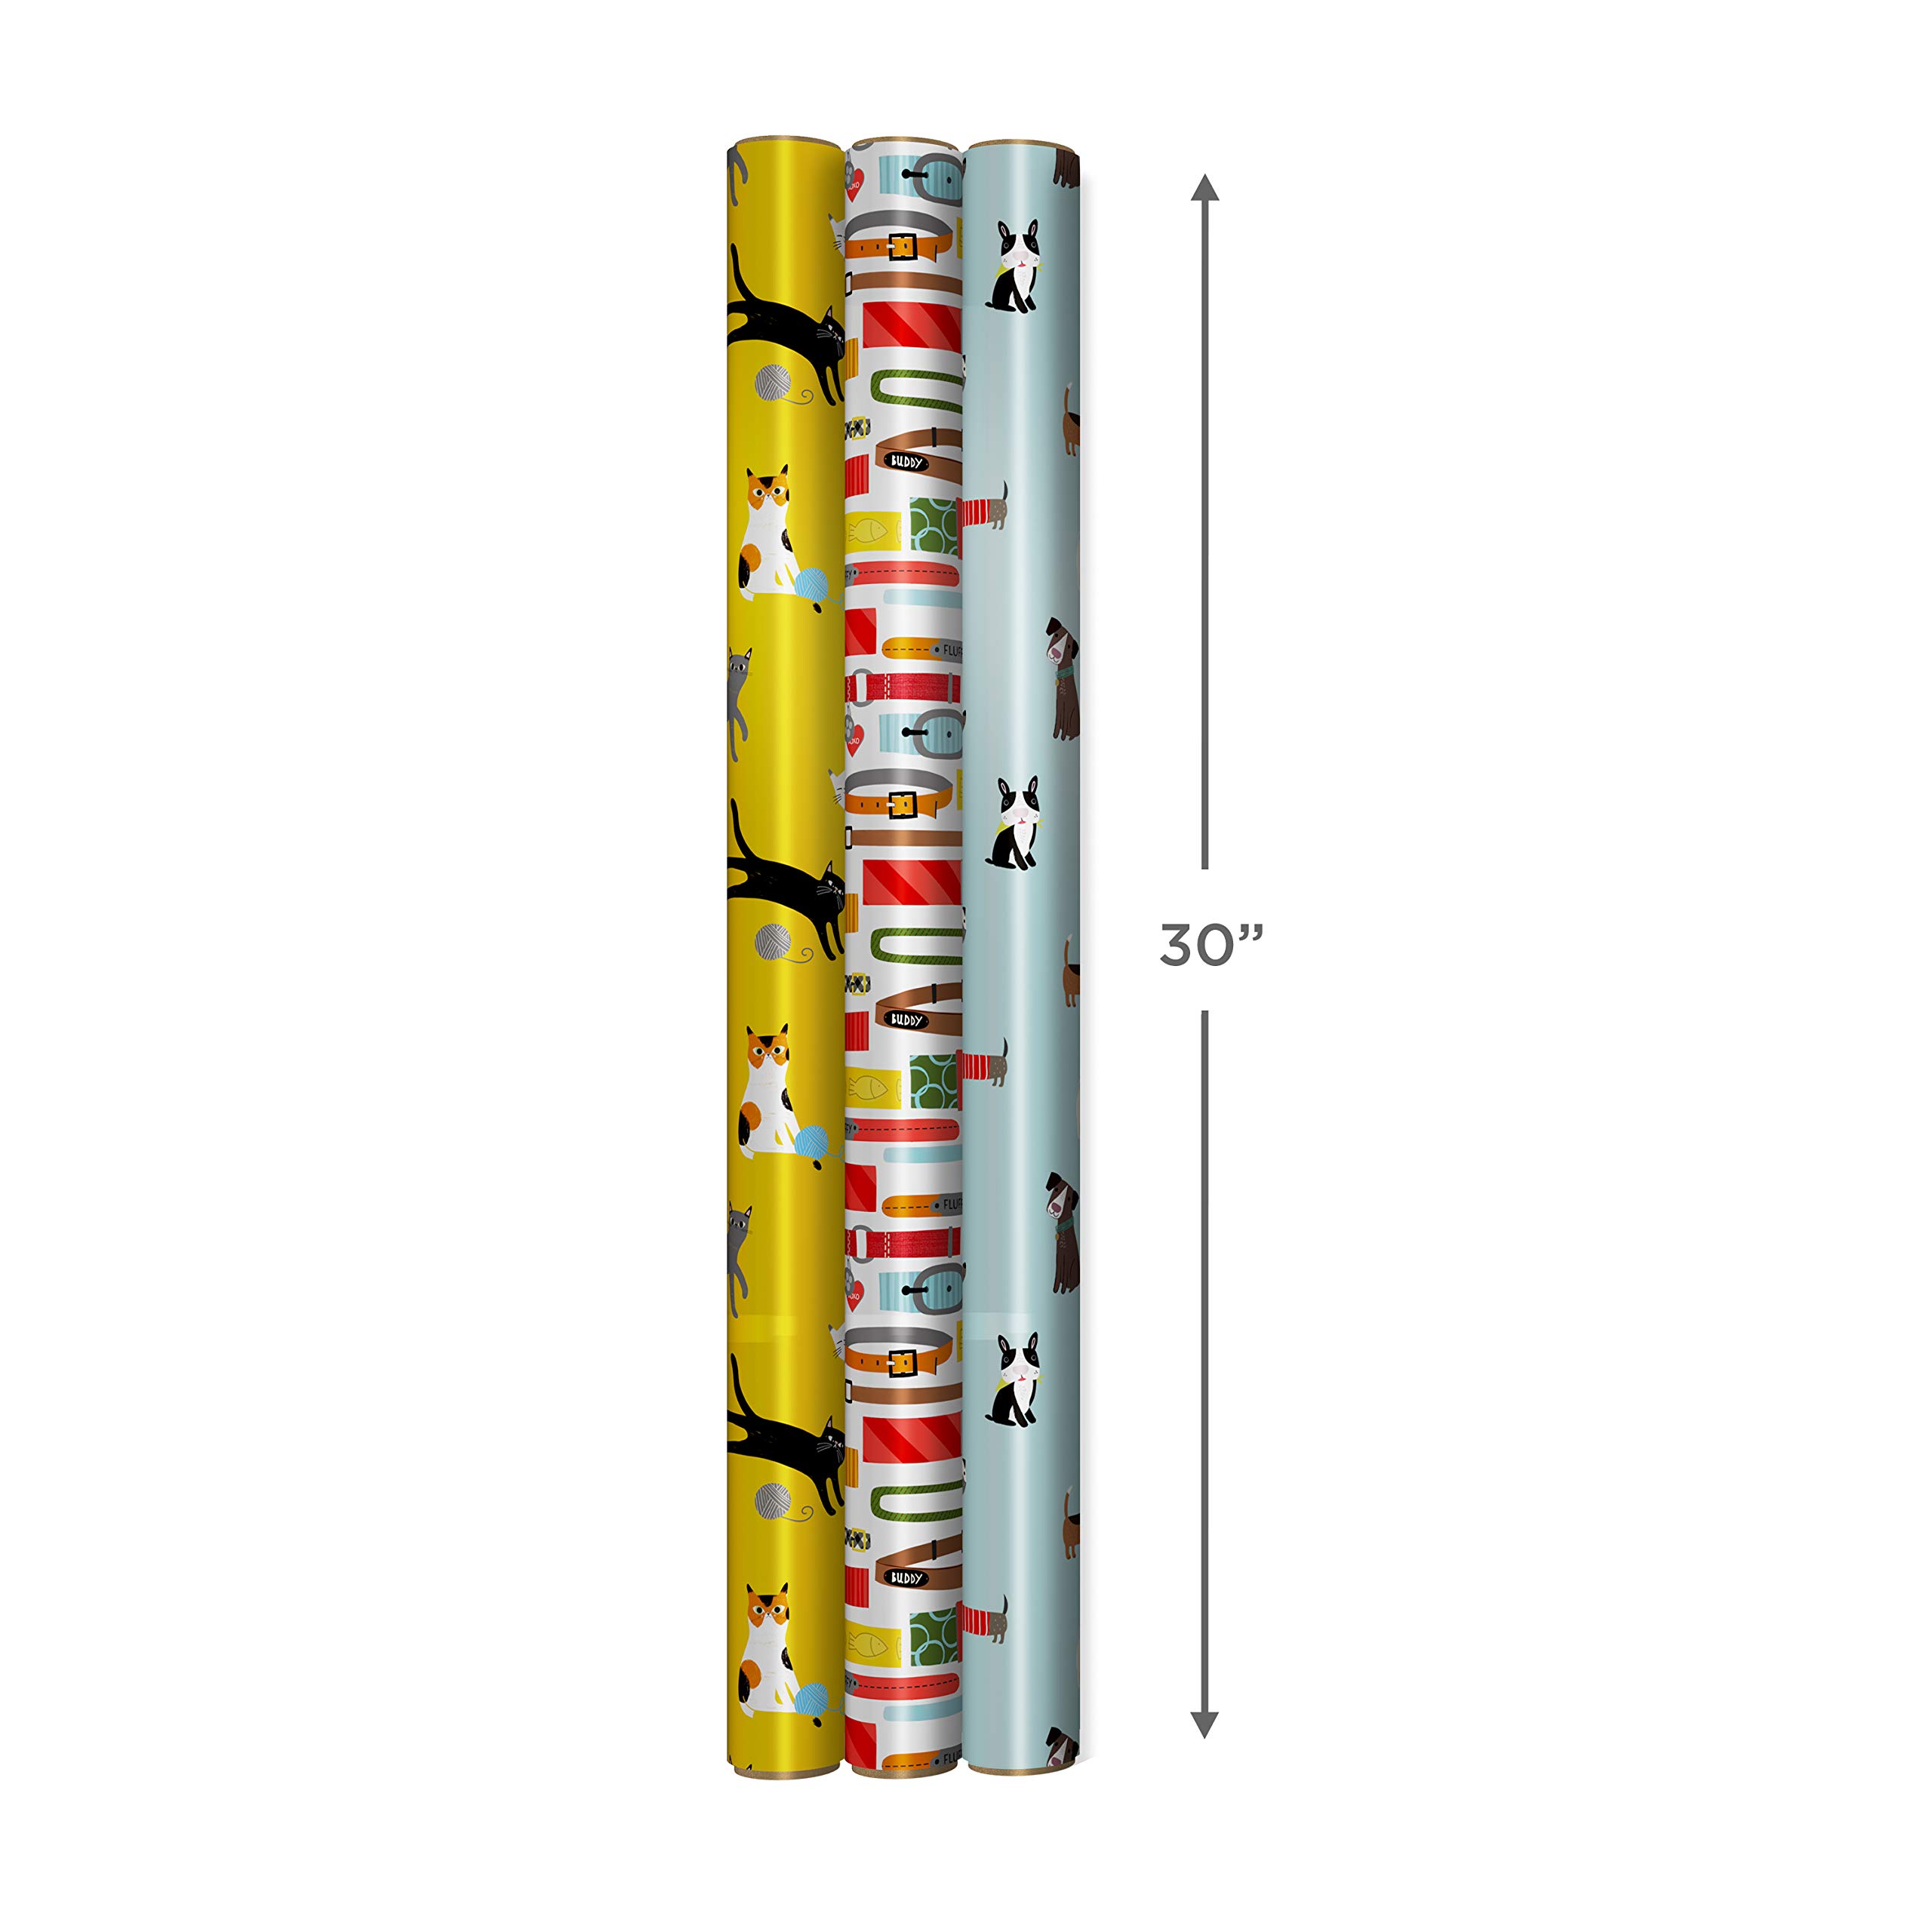 Hallmark Reversible Dog and Cat Wrapping Paper (3 Rolls: 75 sq ft ttl) Yellow, Black and White Stripes, Paw Prints, Pug, Yorkie, Hound for Birthdays, Baby Showers, Christmas, New Pet, Back to School